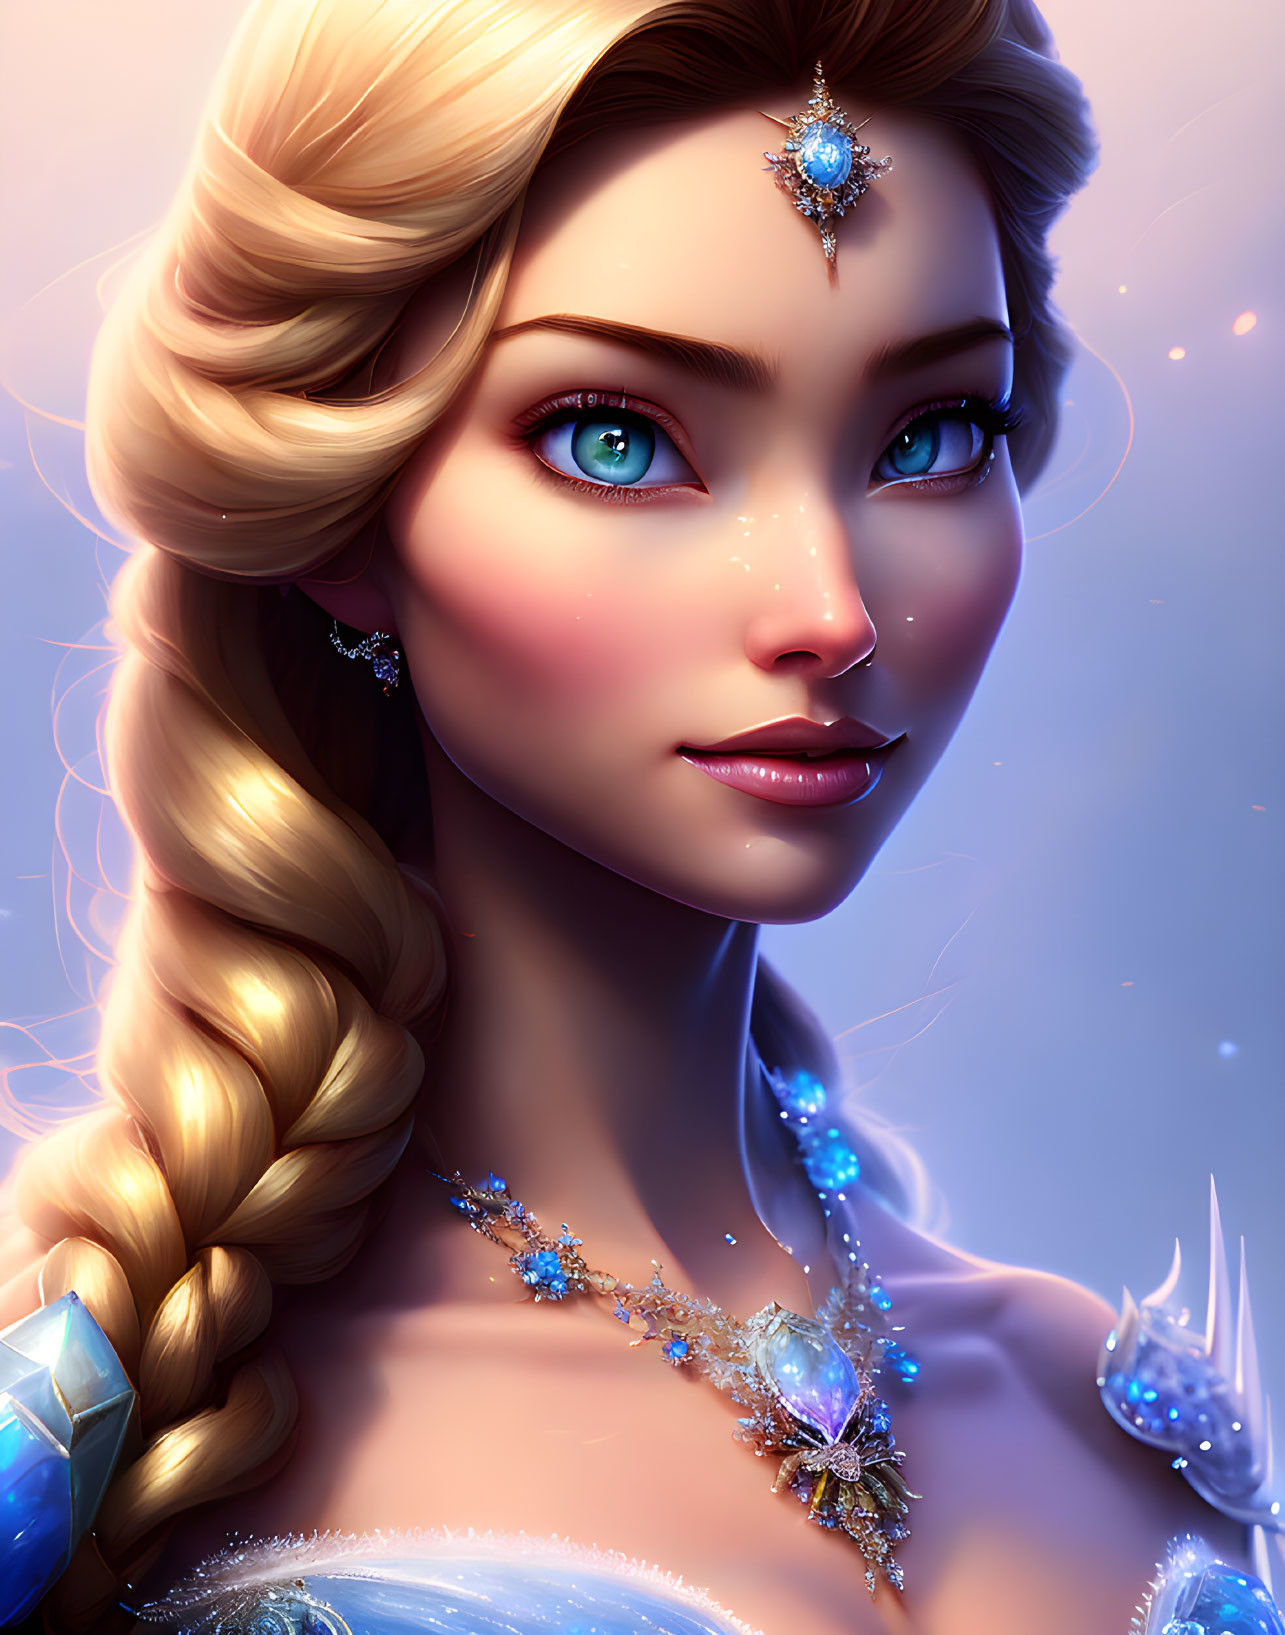 Detailed digital portrait of a woman with icy blue gemstones and braided blonde hair on a soft purple